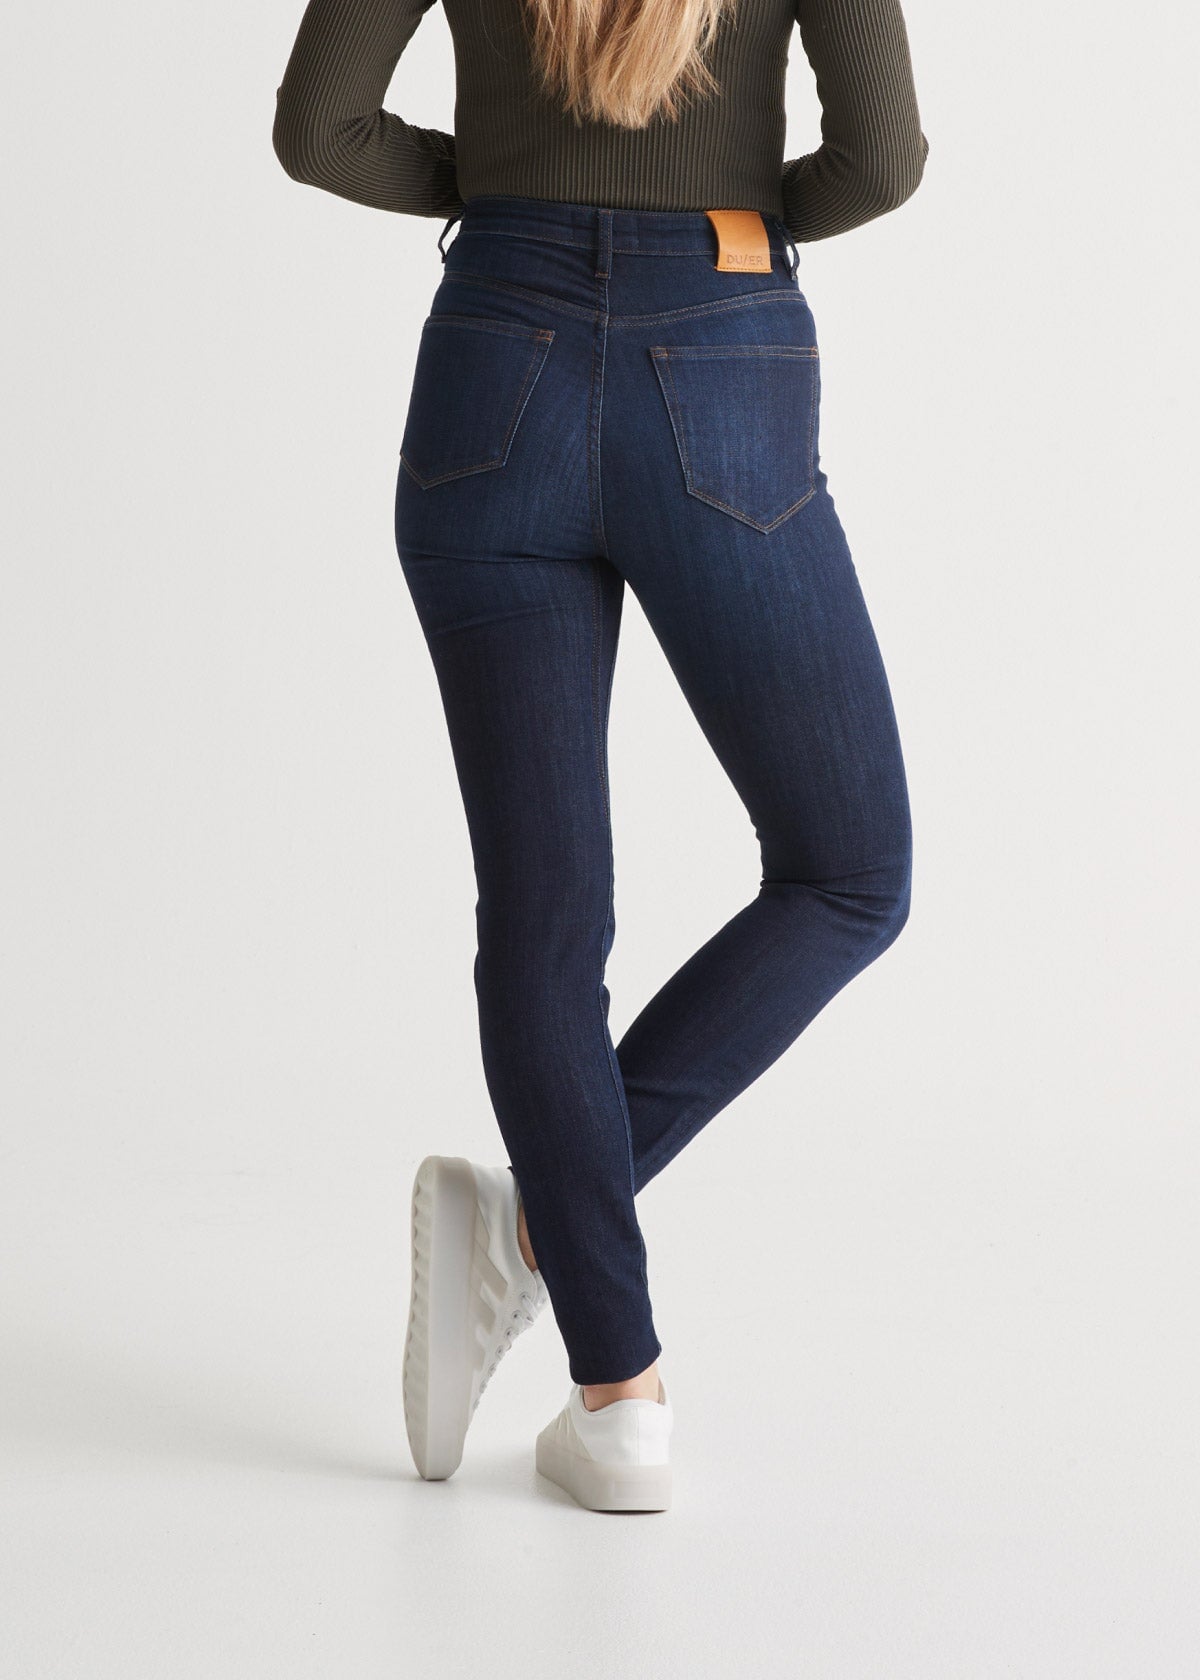 Medium & Large Women High Waisted Denim Jeans at Rs 250/piece in Surat |  ID: 17912758391